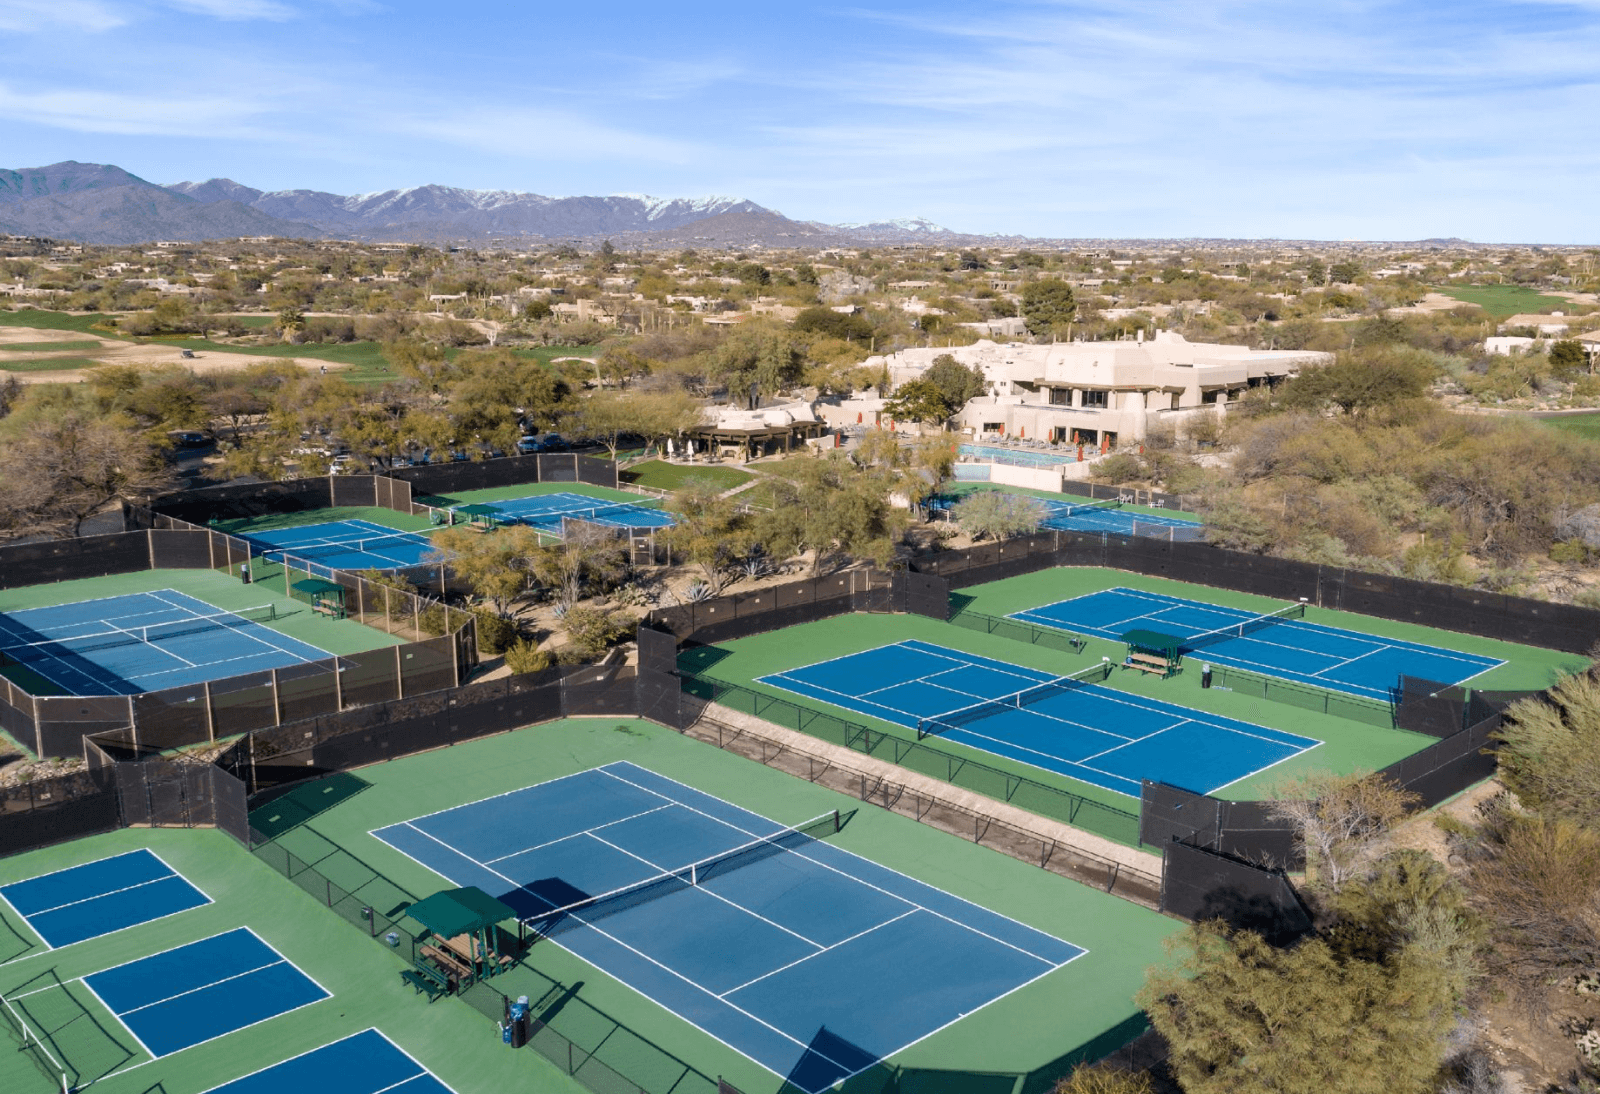 Some of the any tennis courts at the Boulders Resort and Spa